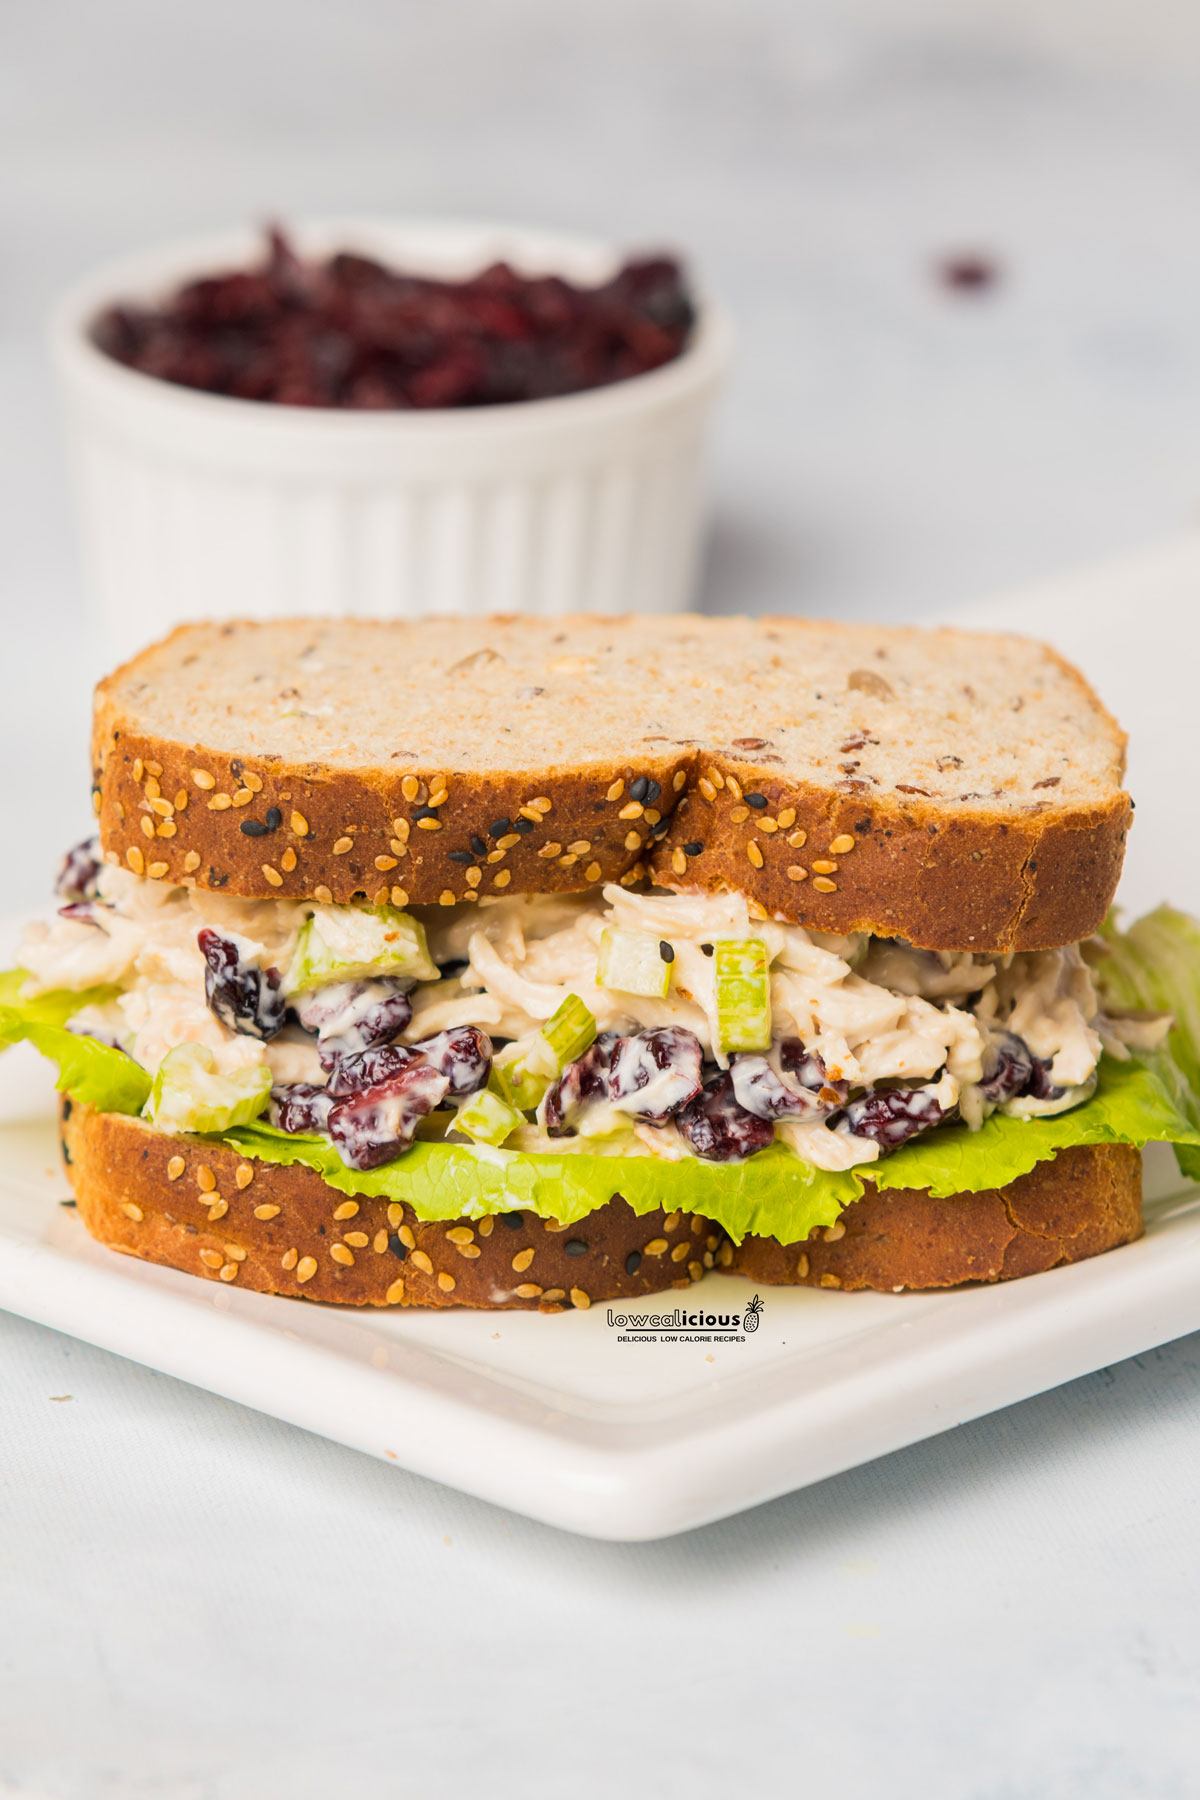 prepared Greek Yogurt Chicken Salad as a sandwich on two slices of bread with lettuce plated on a square white plate with a bowl of dried cranberries in the background